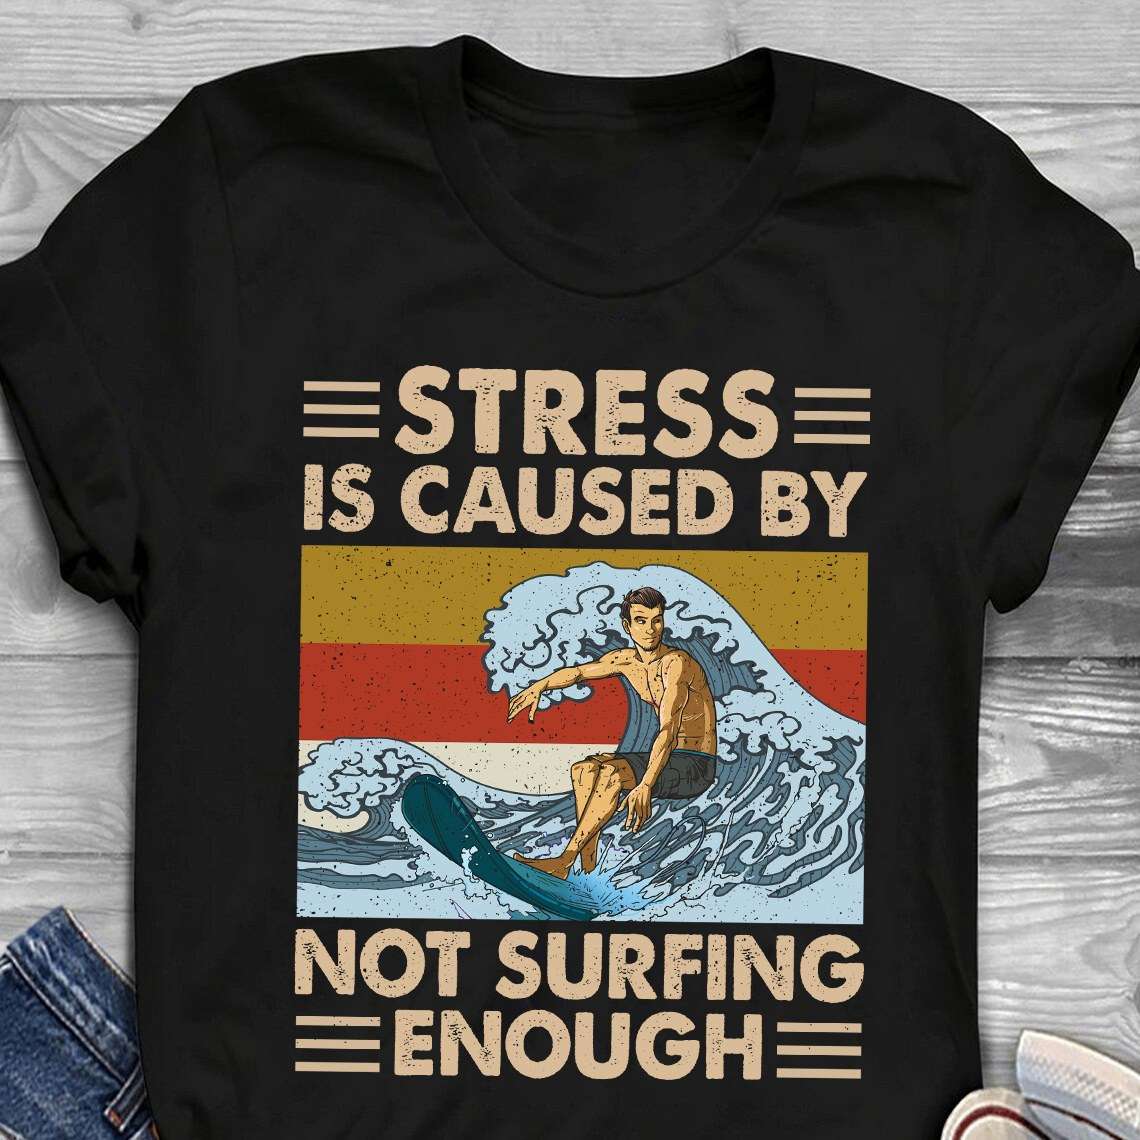 Stress is caused not surfing enough - Man wave surfing, pro wave surfer